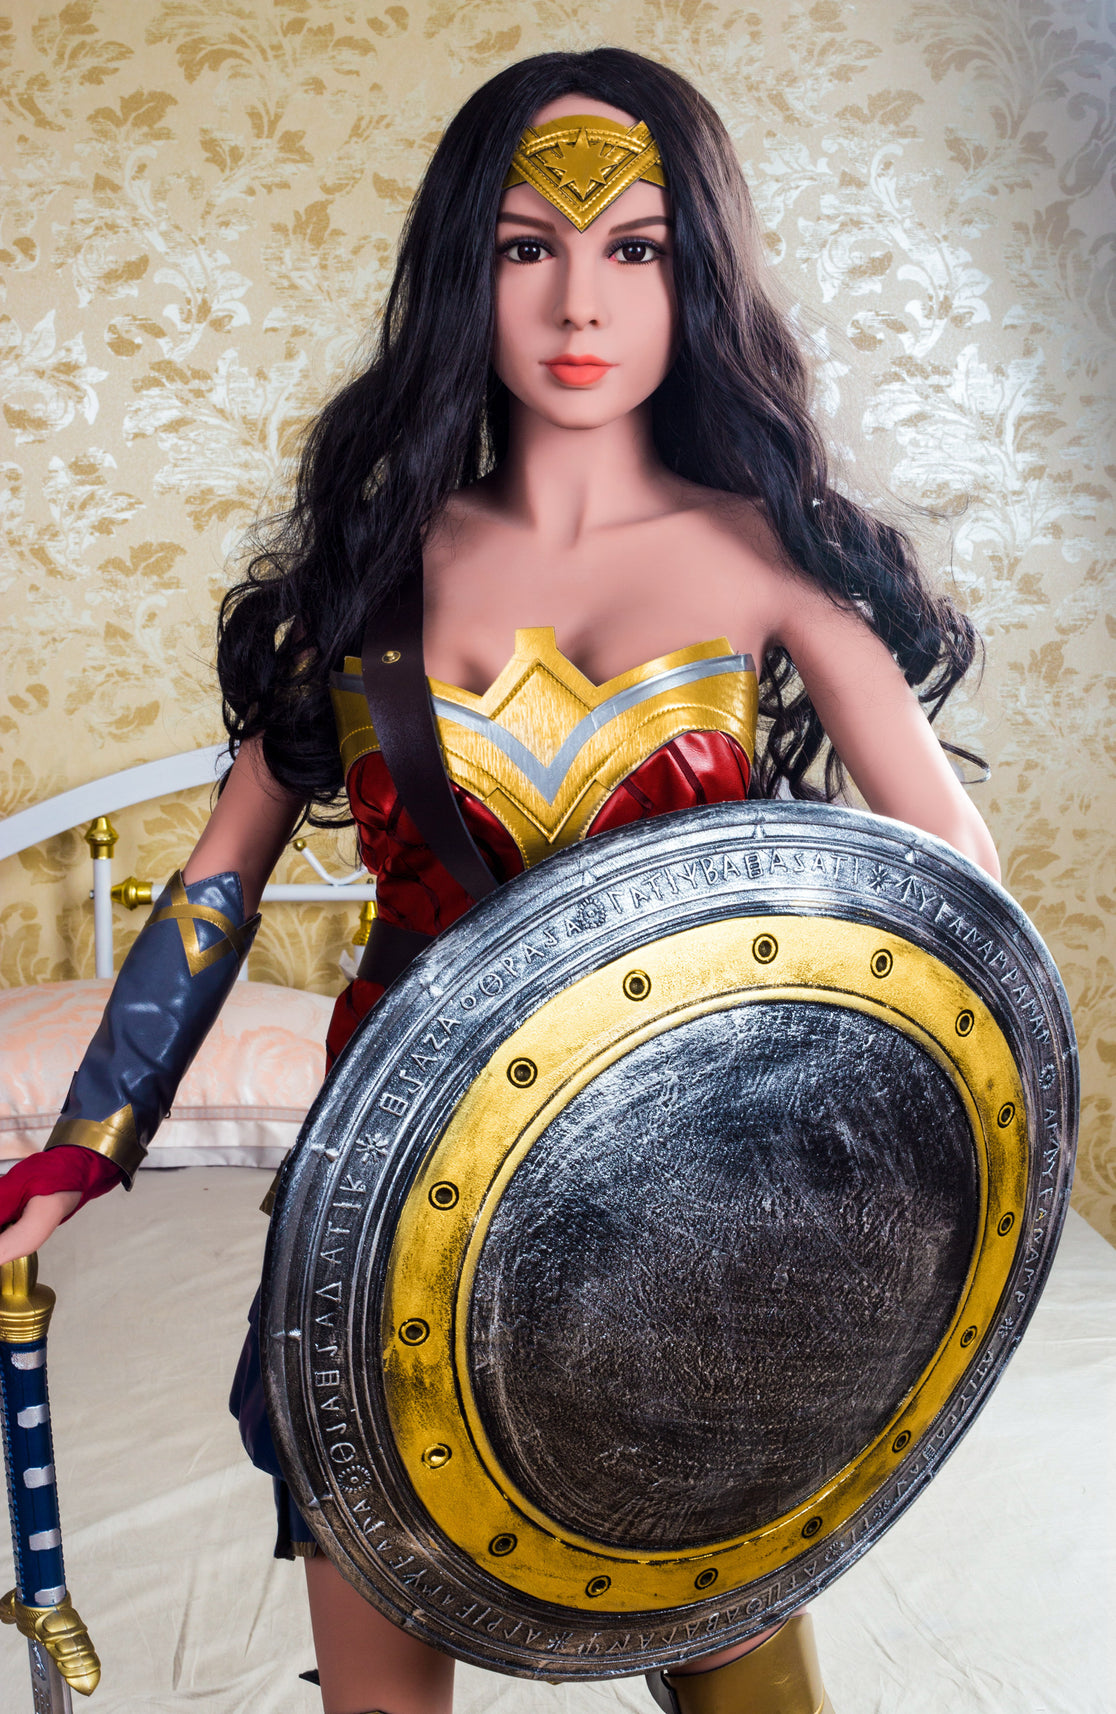 becky medina recommends wonder woman sex doll pic